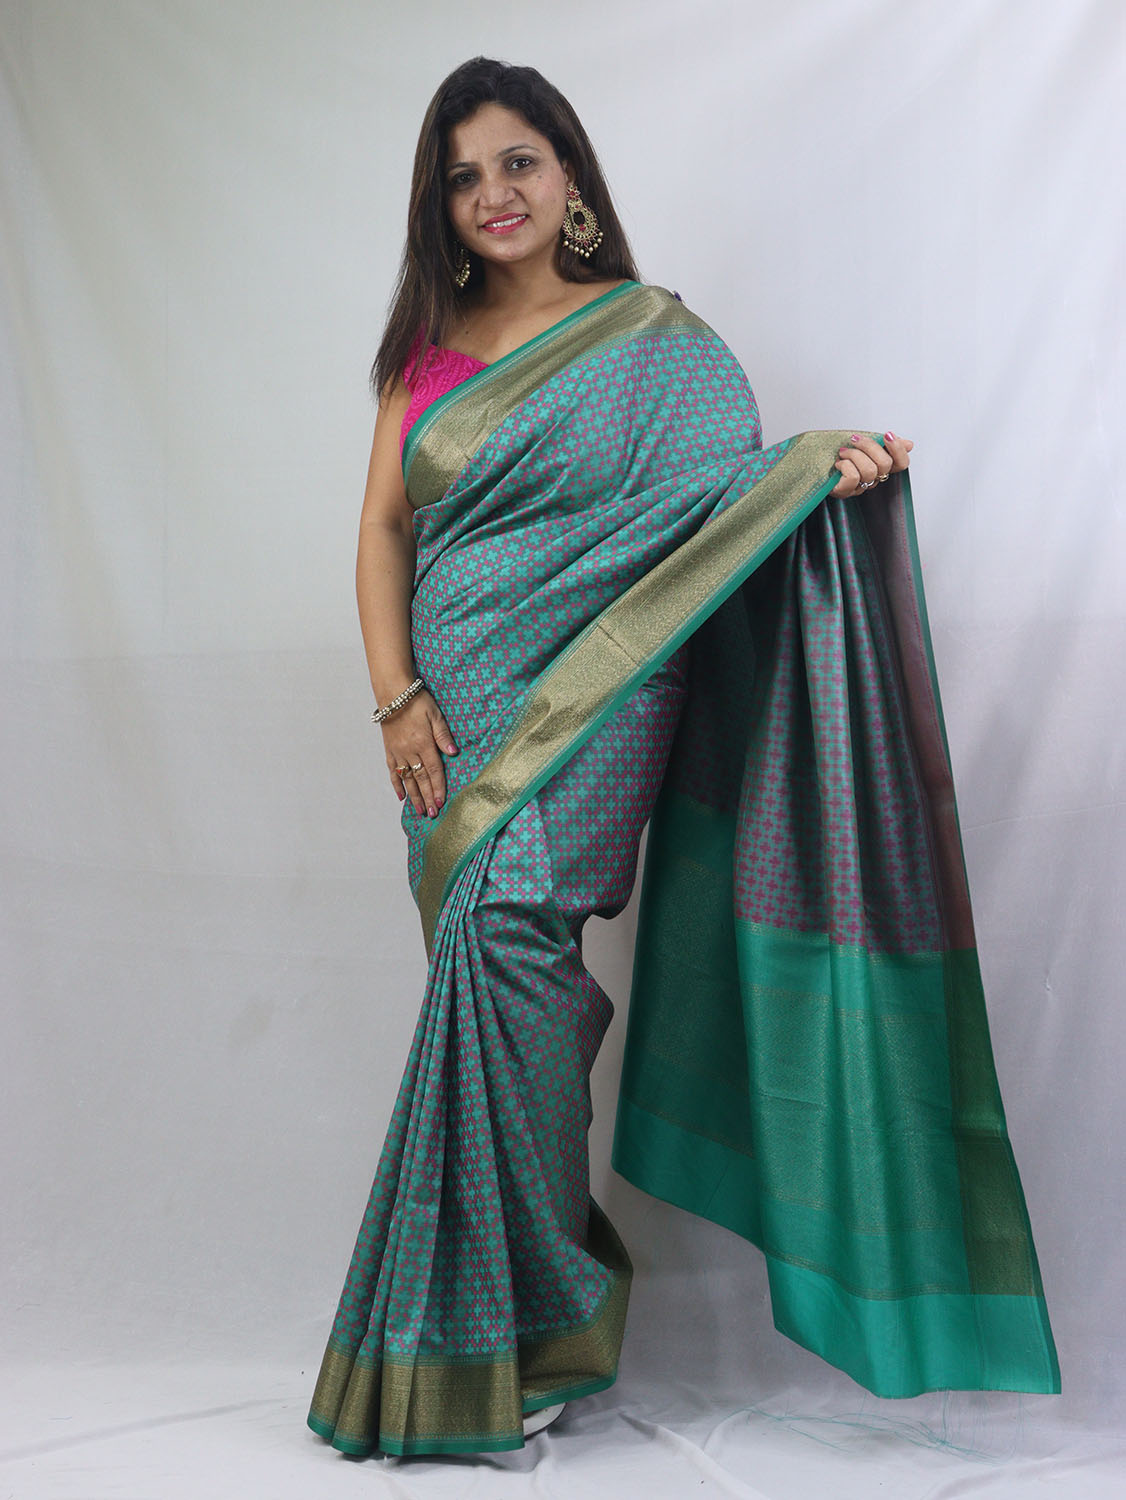 Shop Now for Blue Banarasi Soft Silk Saree with Contrast Border - Latest Arrival! - Luxurion World